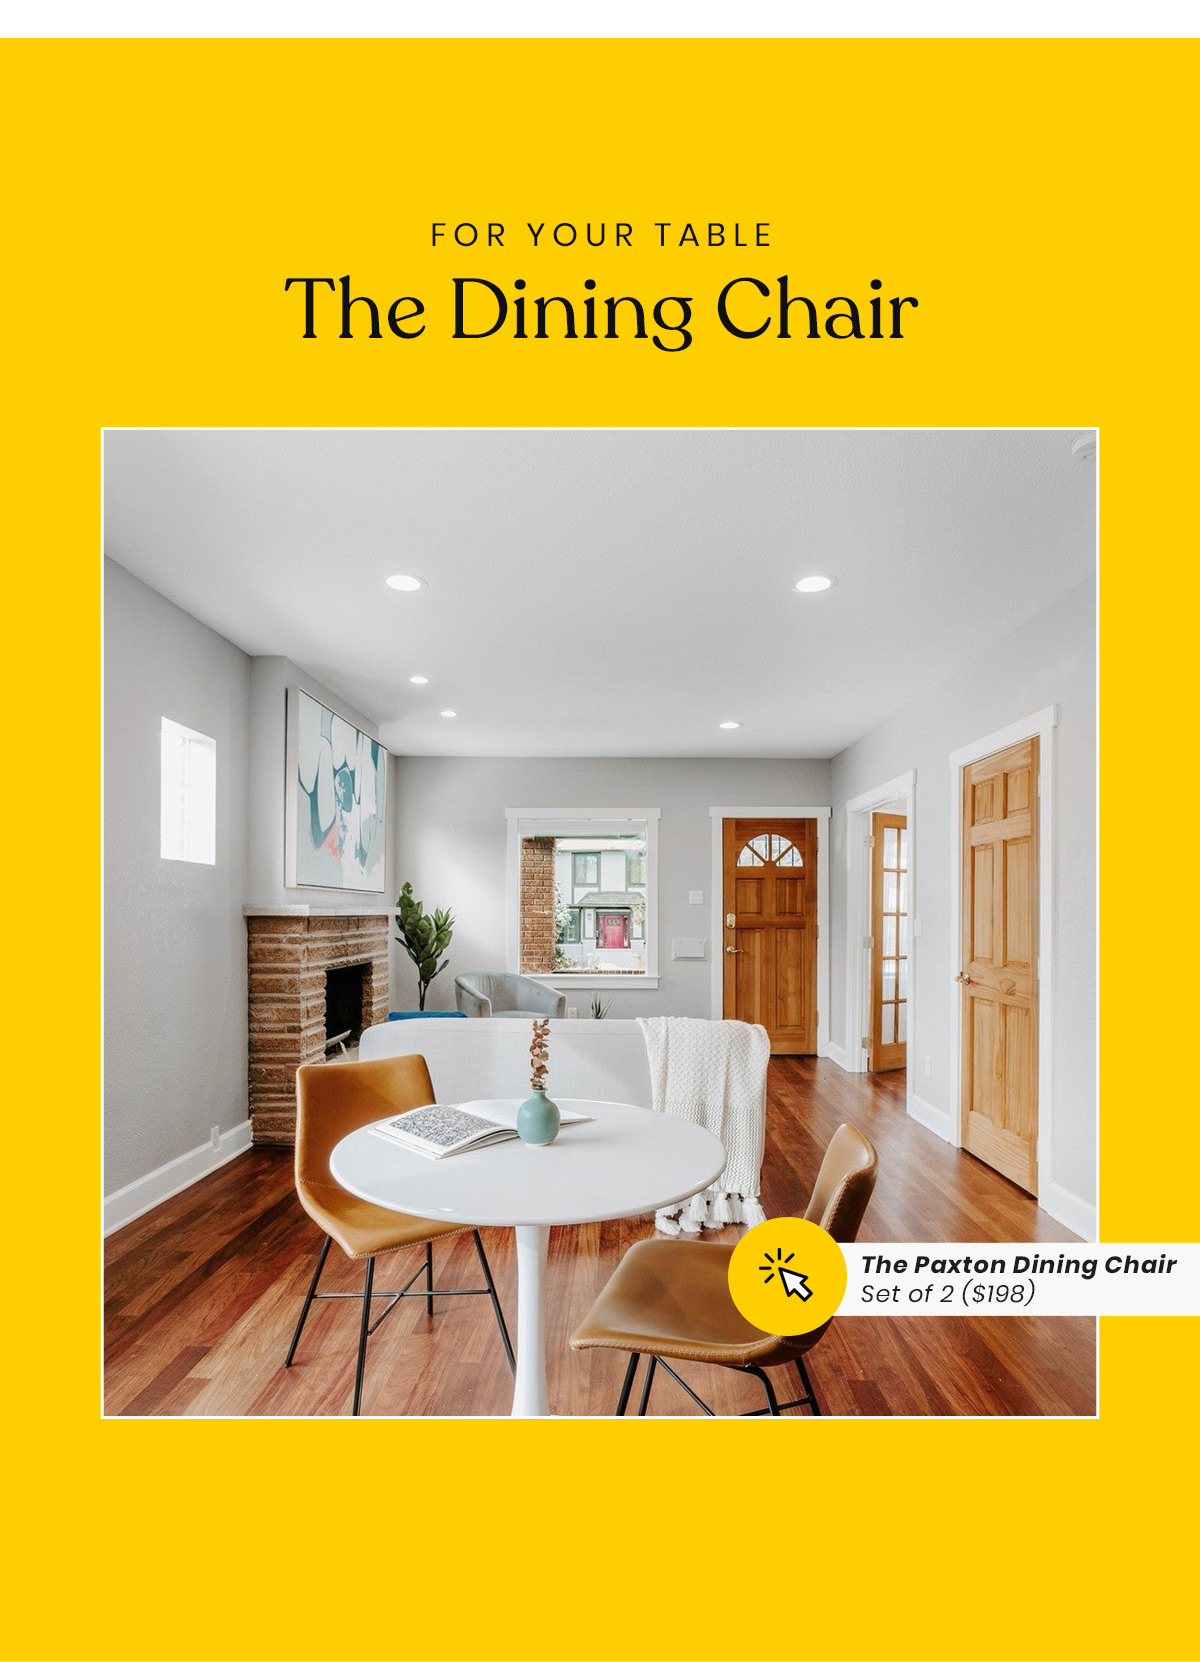 For Your Table | The Dining Chair | The Paxton Dining Chair Set Of 2 ($198)